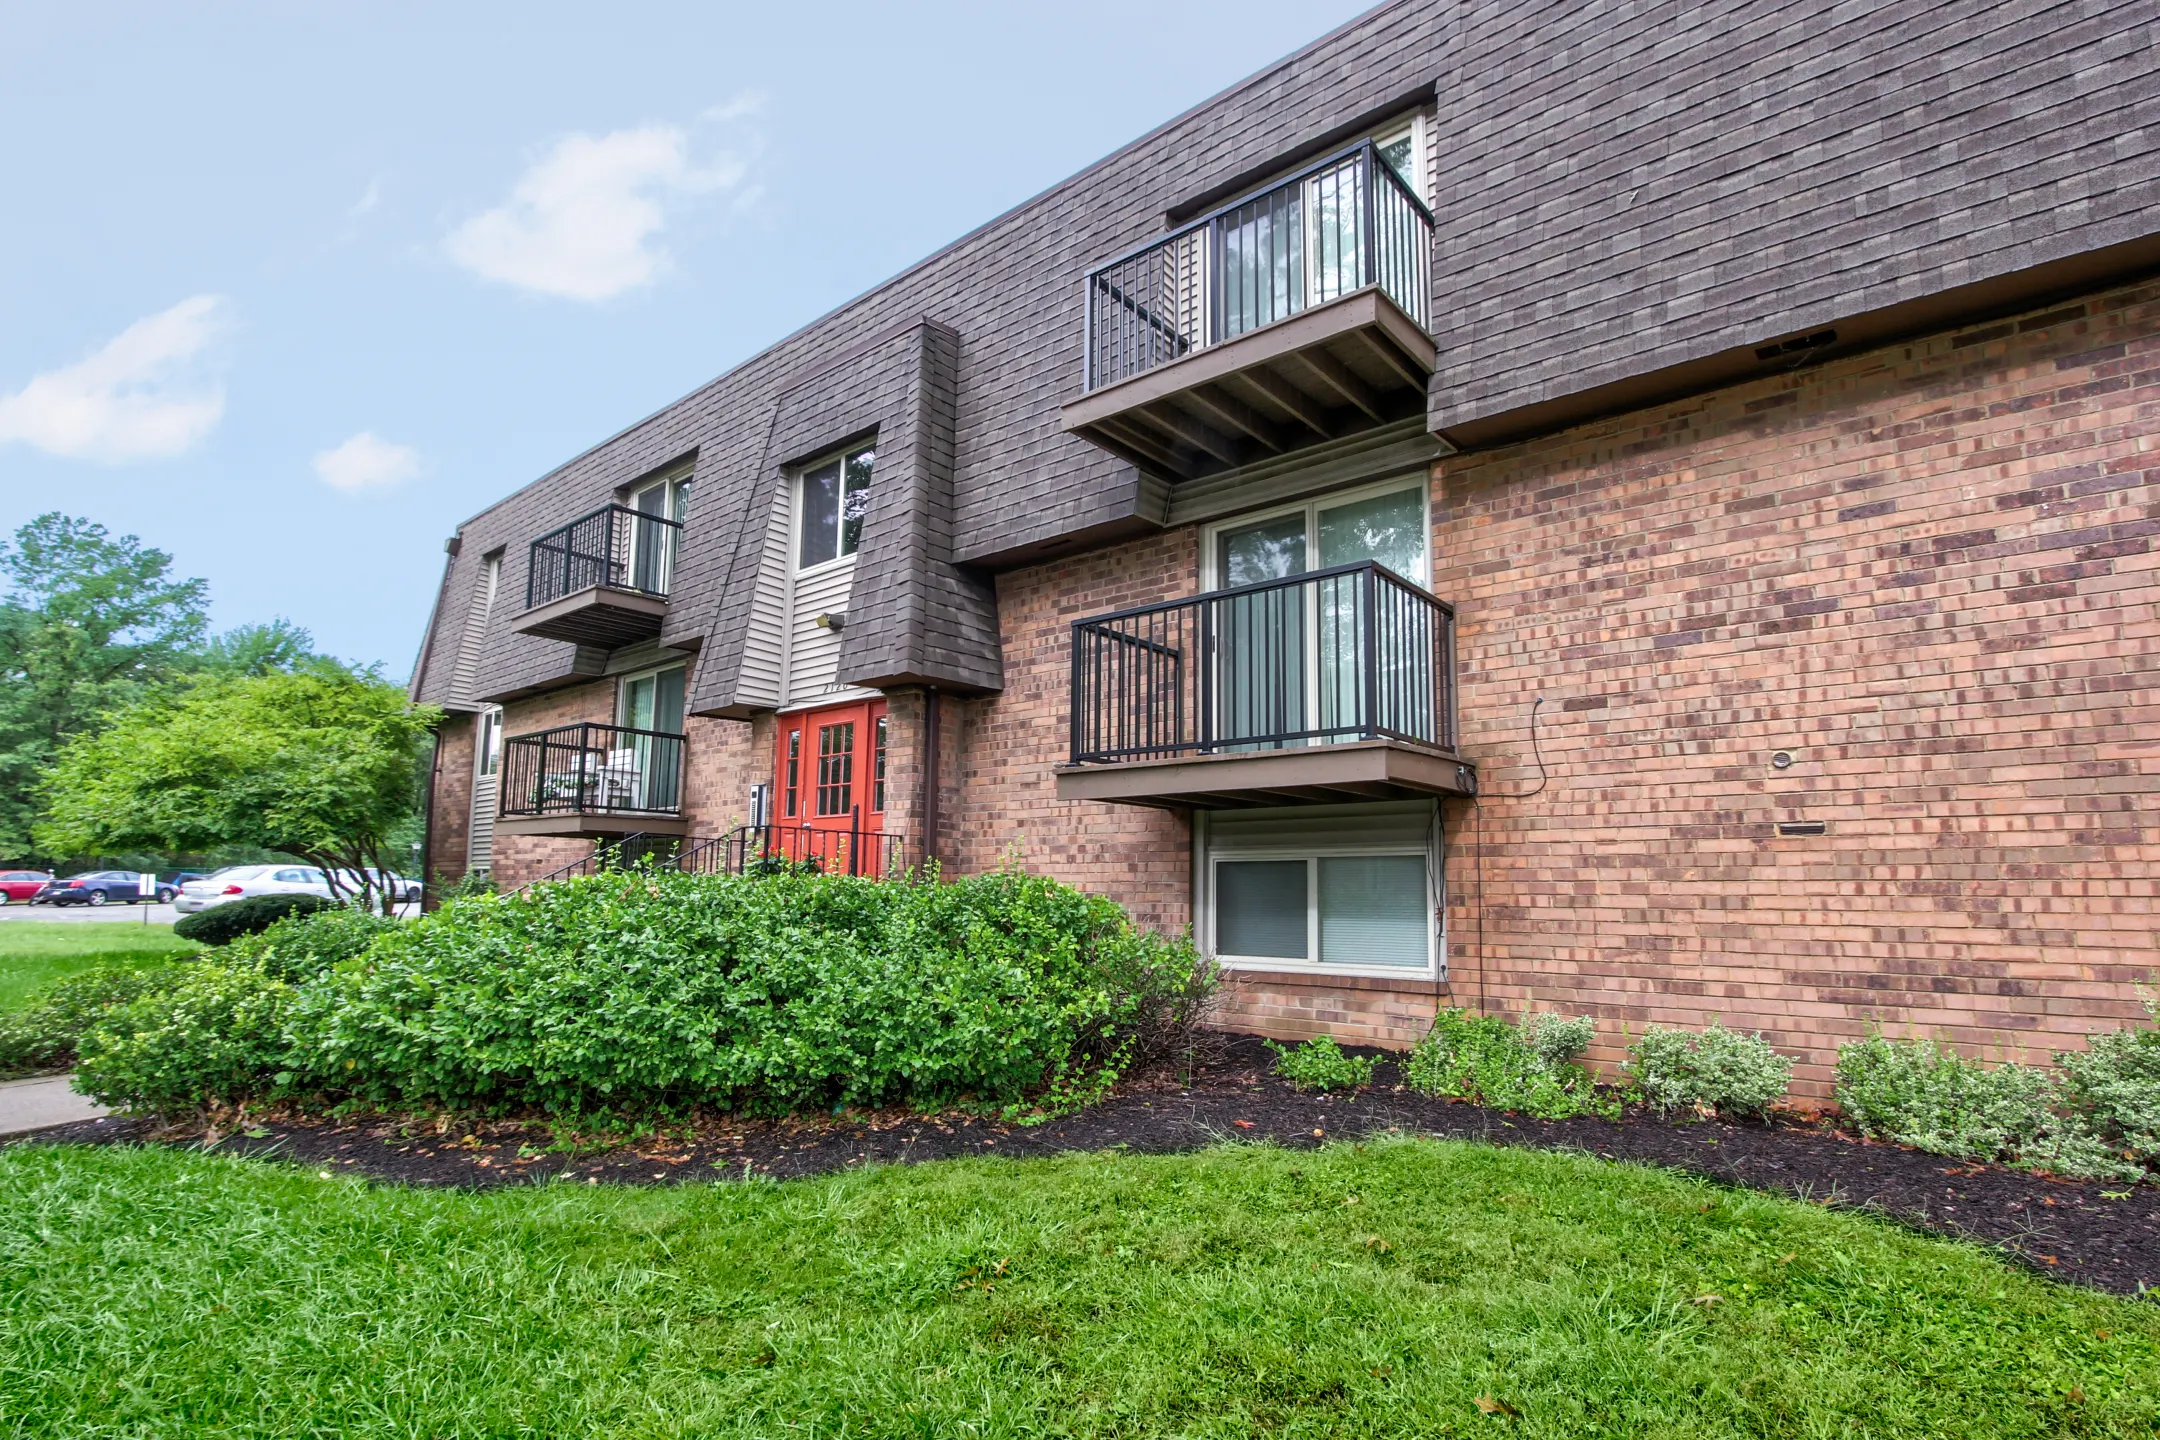 Building - Peppertree Apartments - Niles, OH